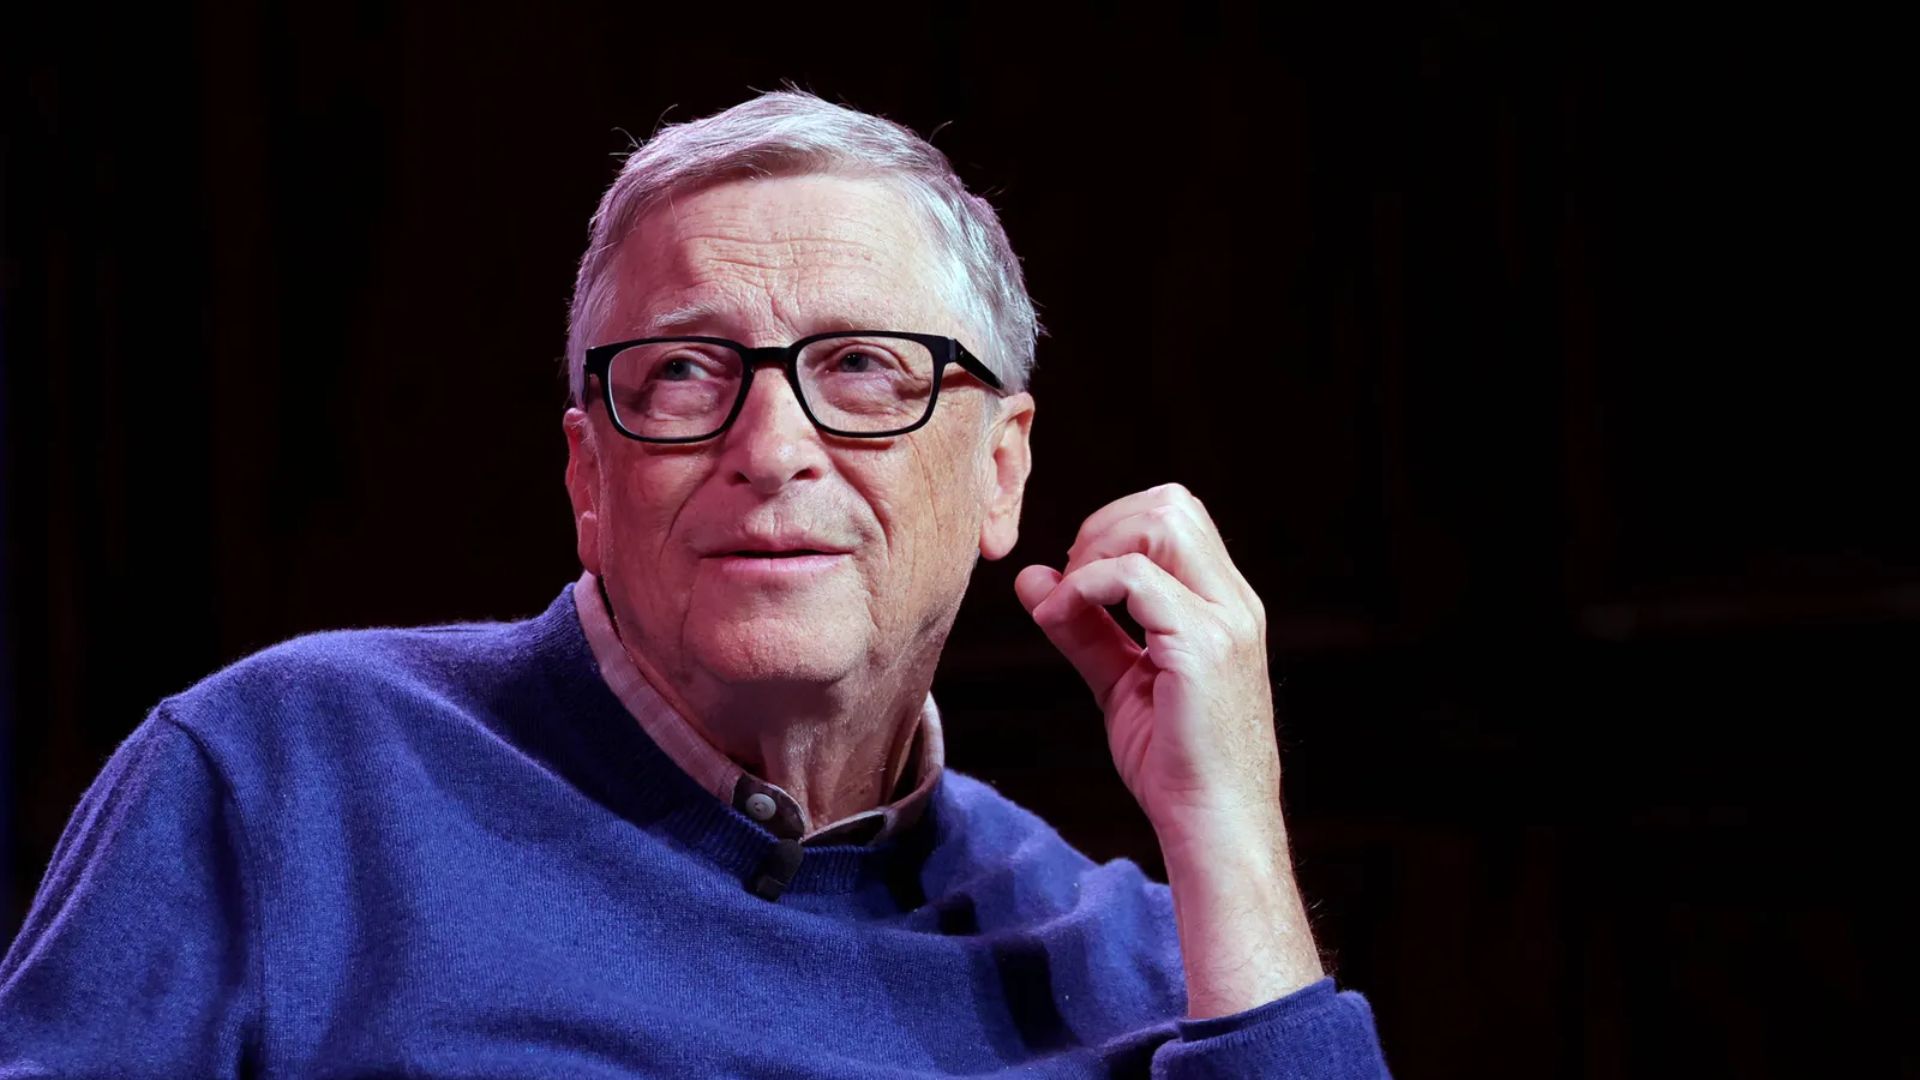 In an interview with Bloomberg, Bill Gates says that the growth in AI 